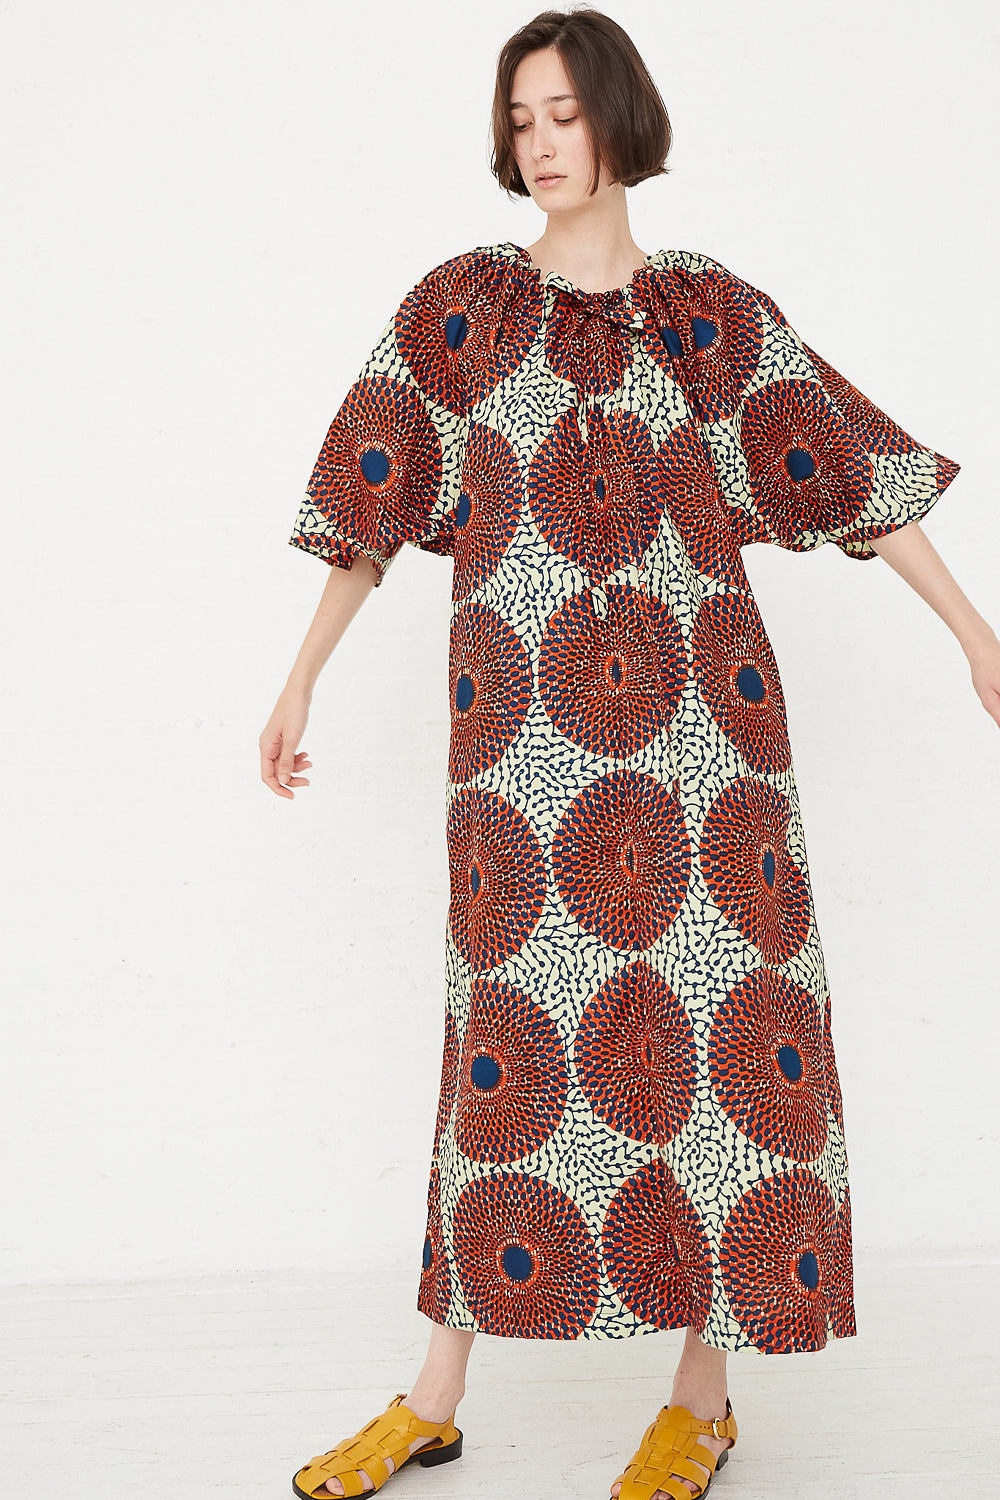 Odile Jacobs - Arabelle Dress in Rust Circles front view